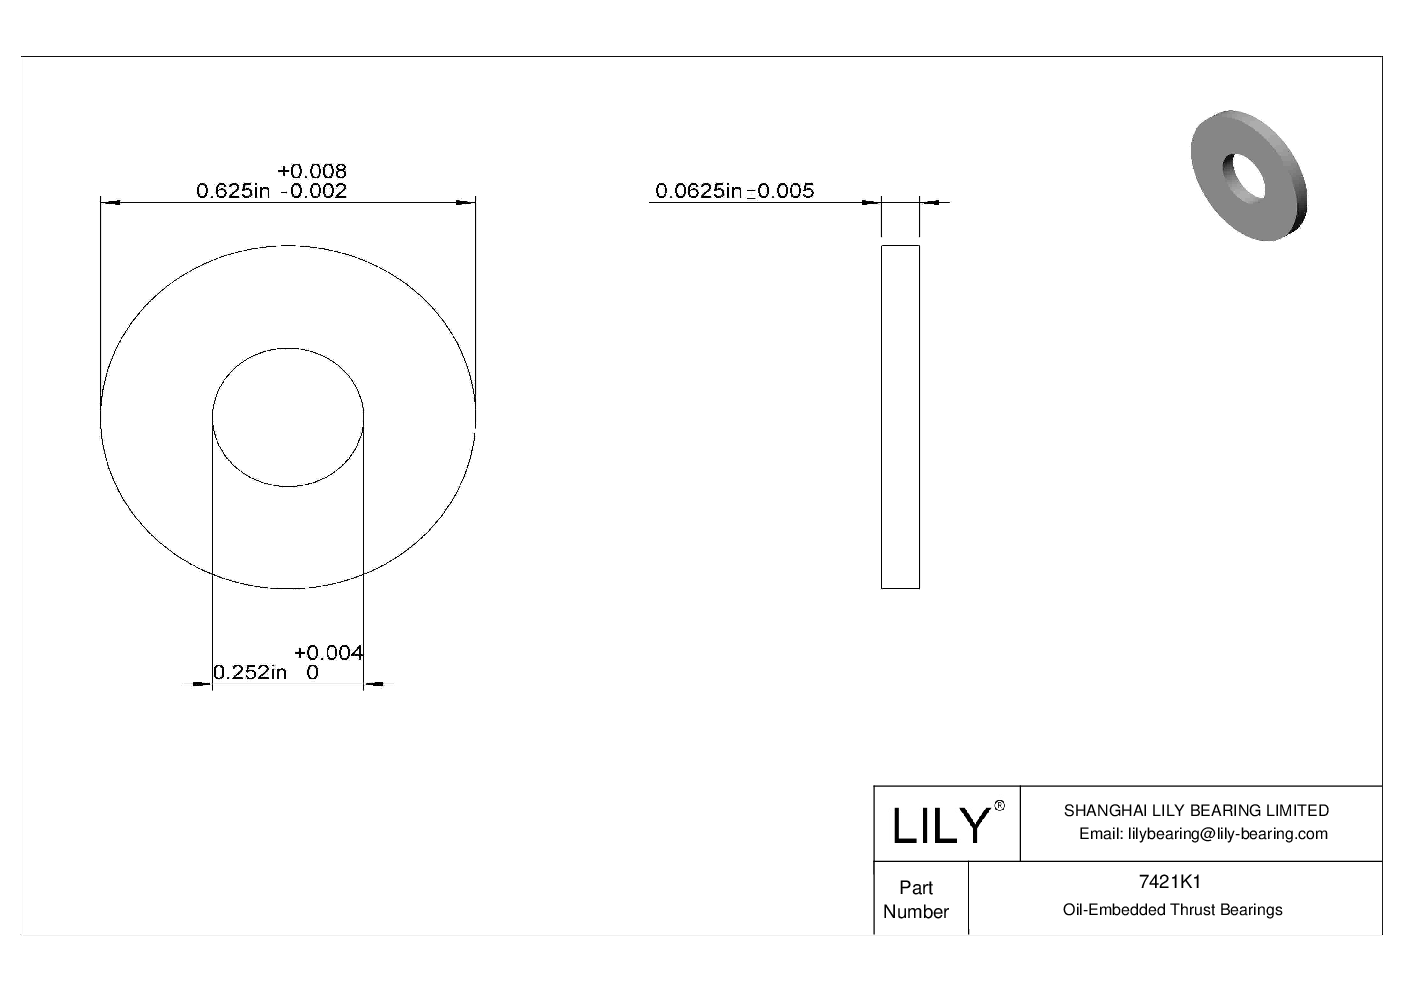 HECBKB Ultra-Low-Friction Oil-Embedded Thrust Bearings cad drawing